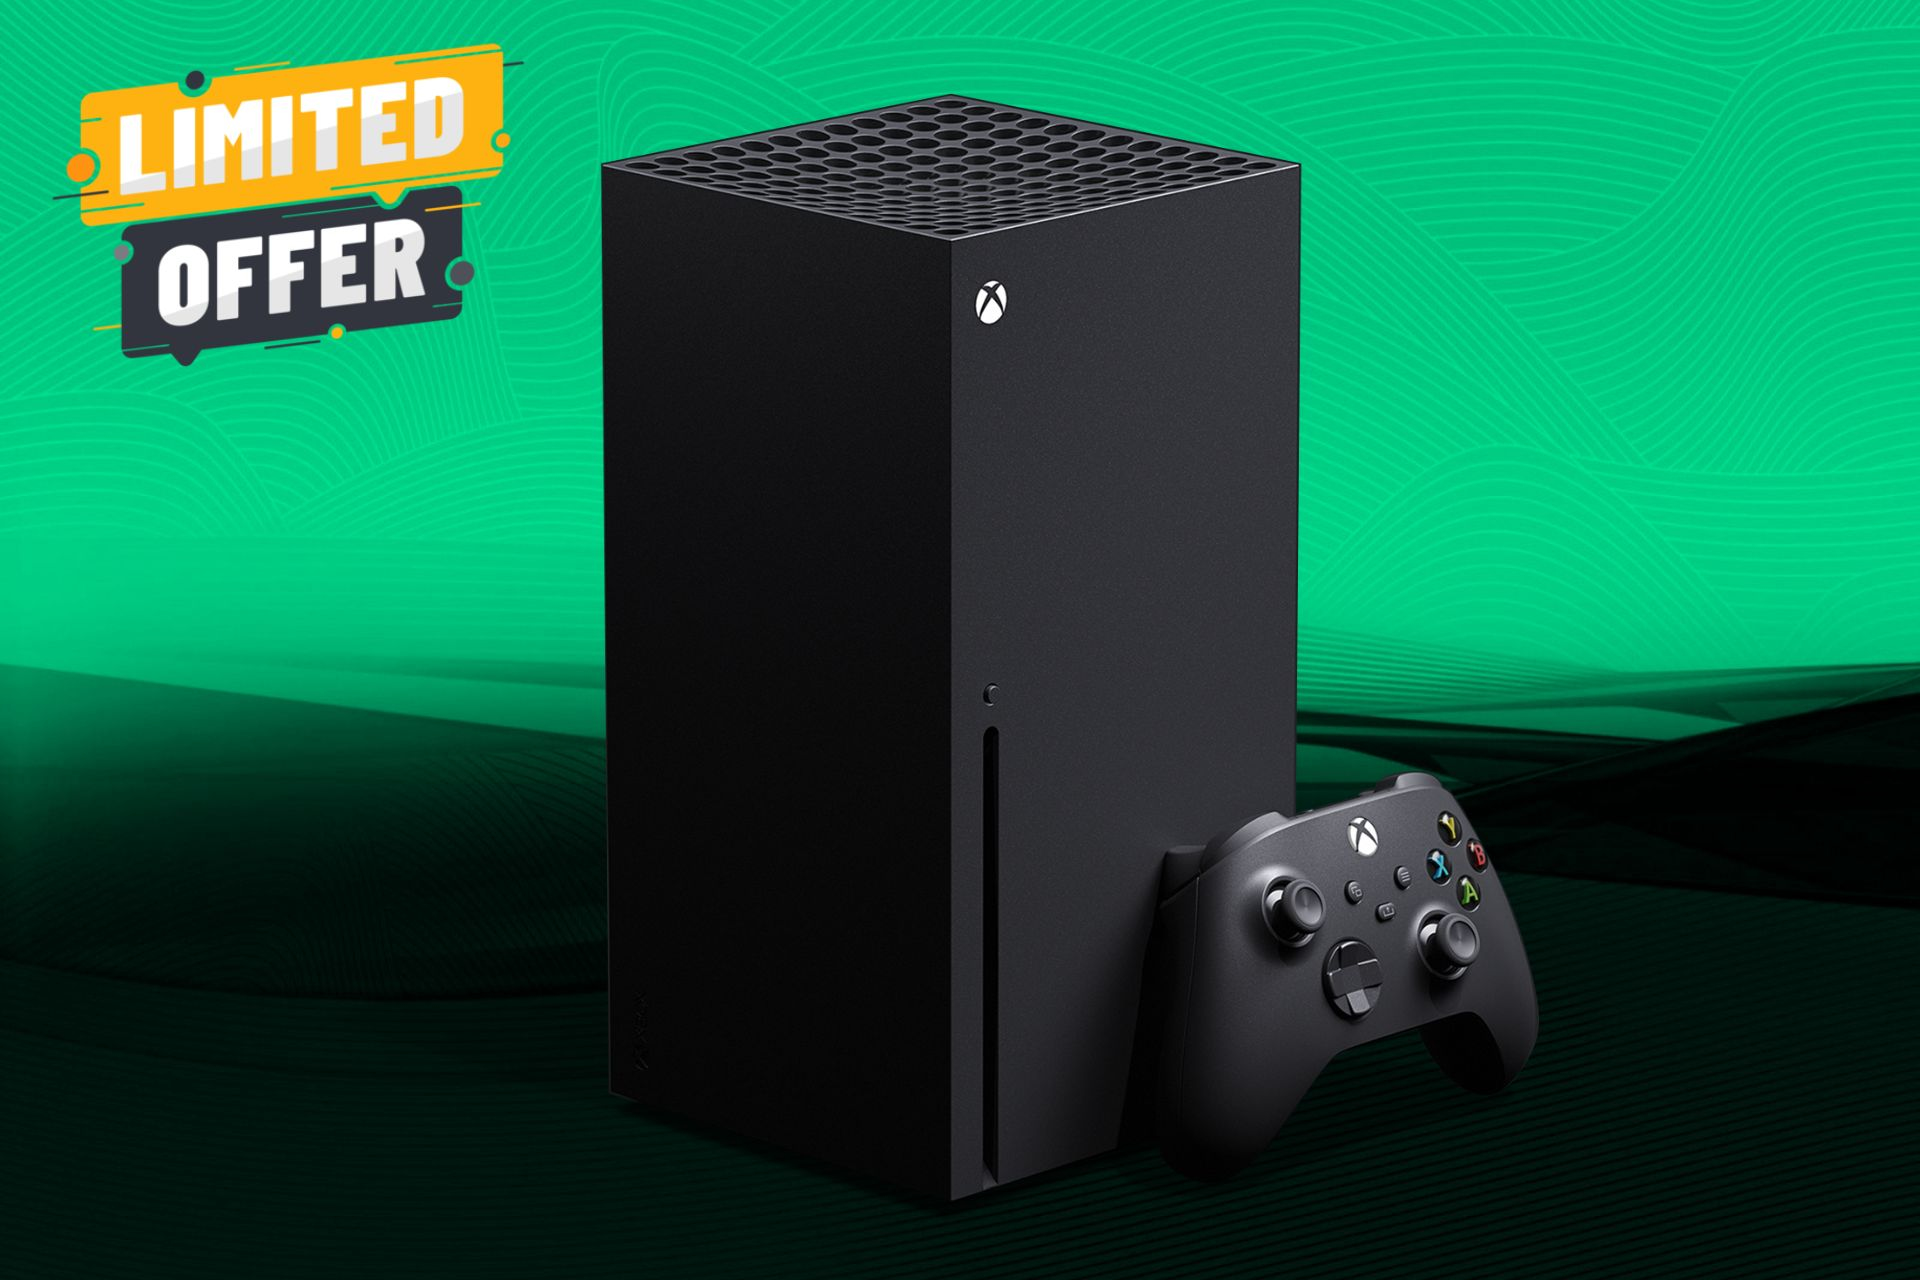 Xbox Series X on a green background with a limited offer sign